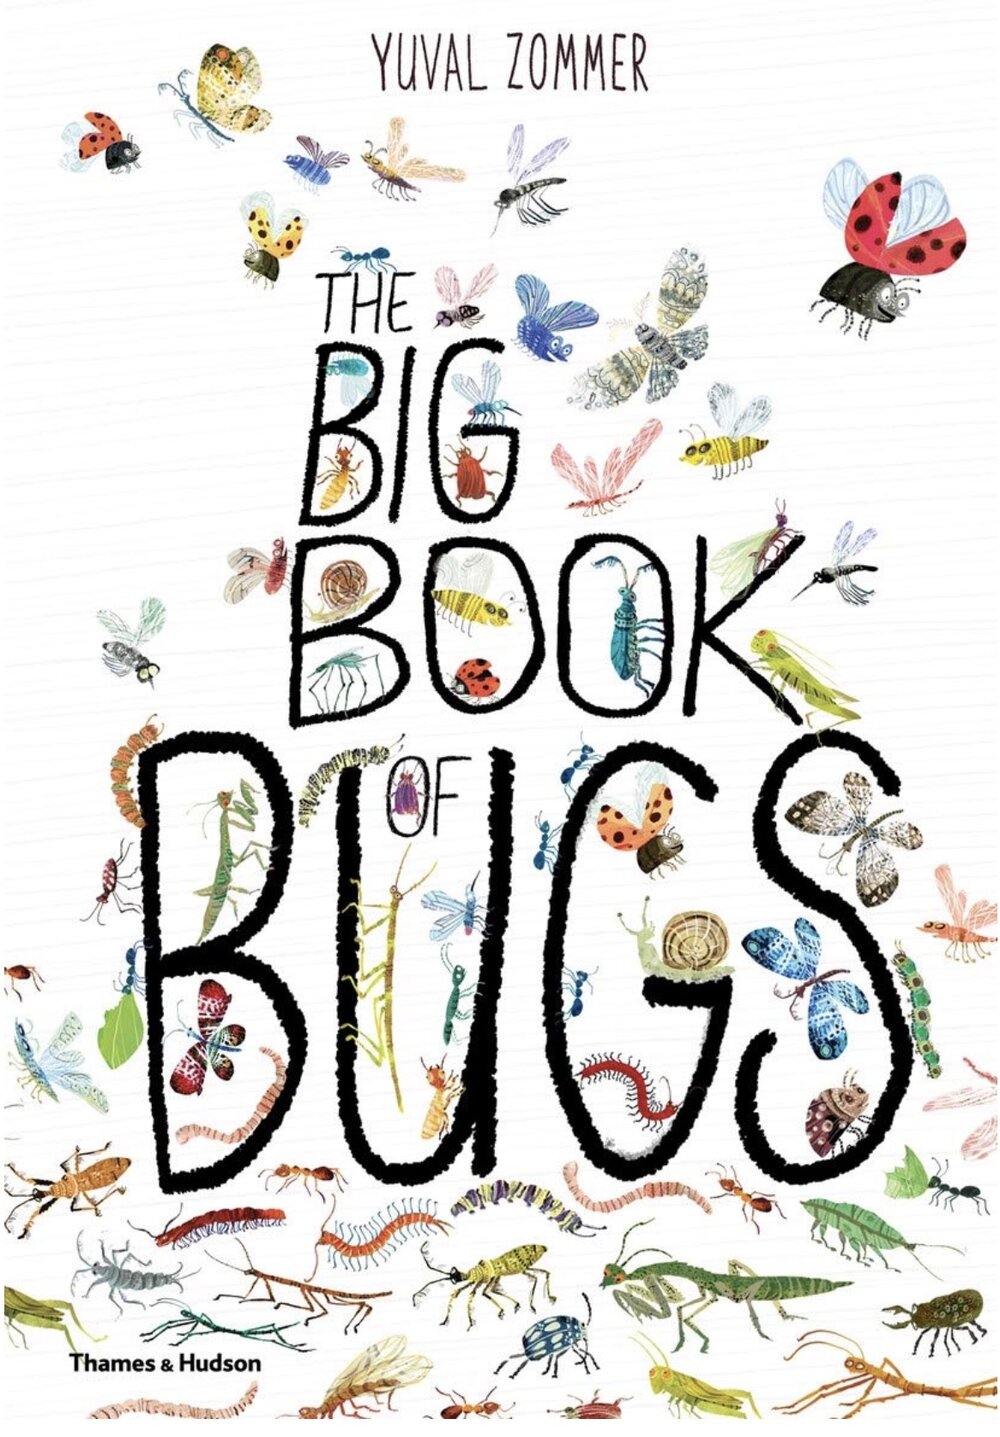 Book of bugs cover small.jpg